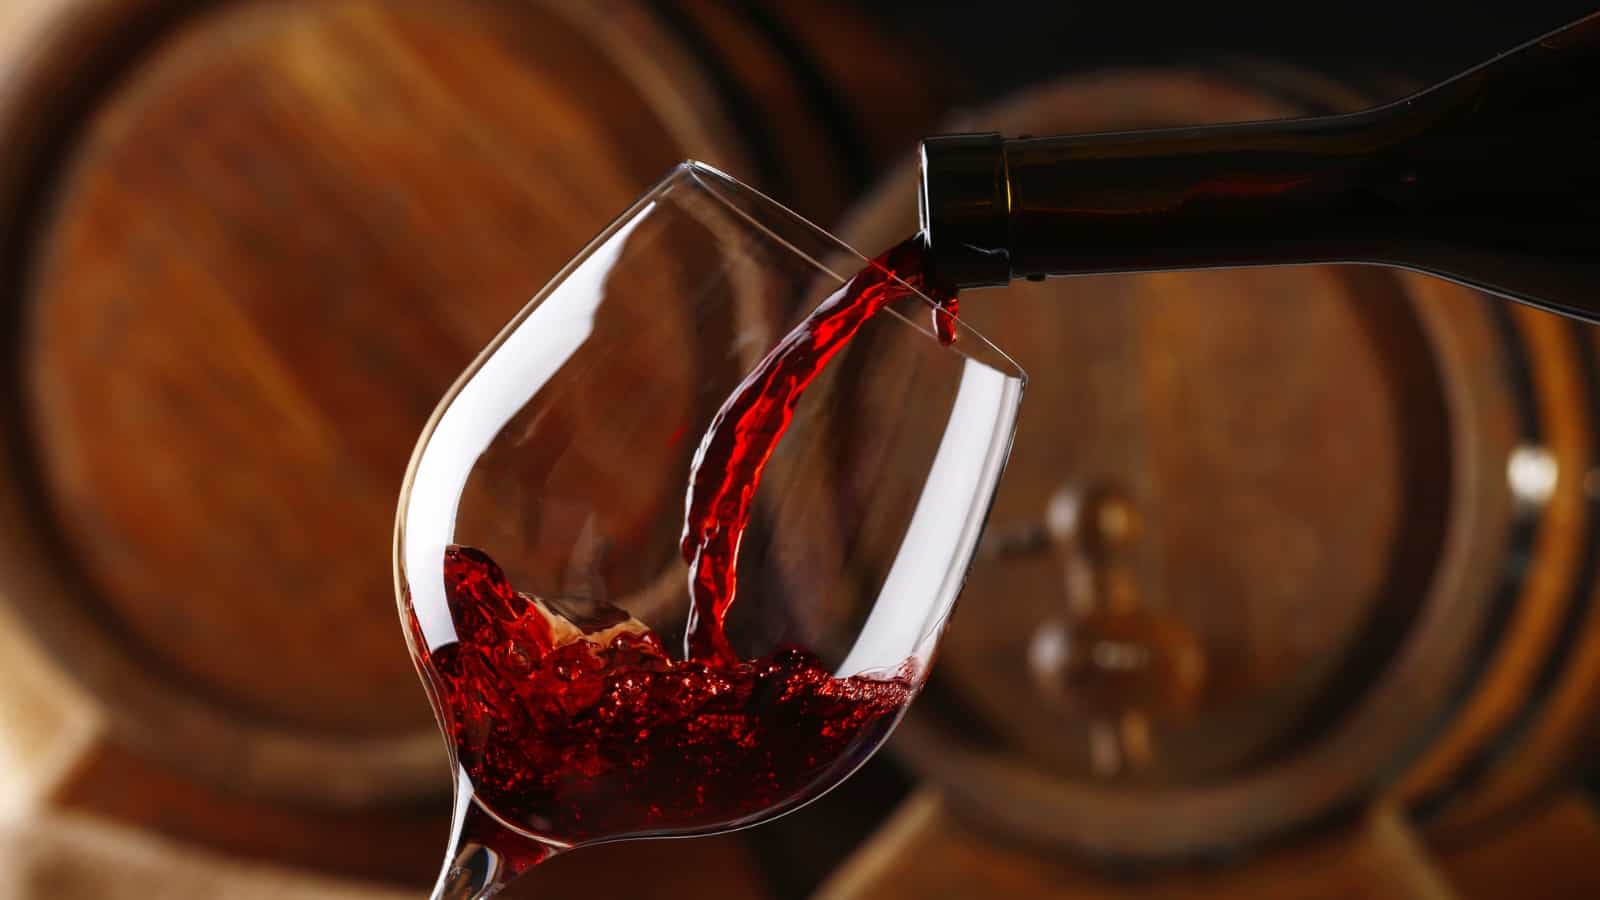 pouring red wine into a glass from a bottle on the background of barrels